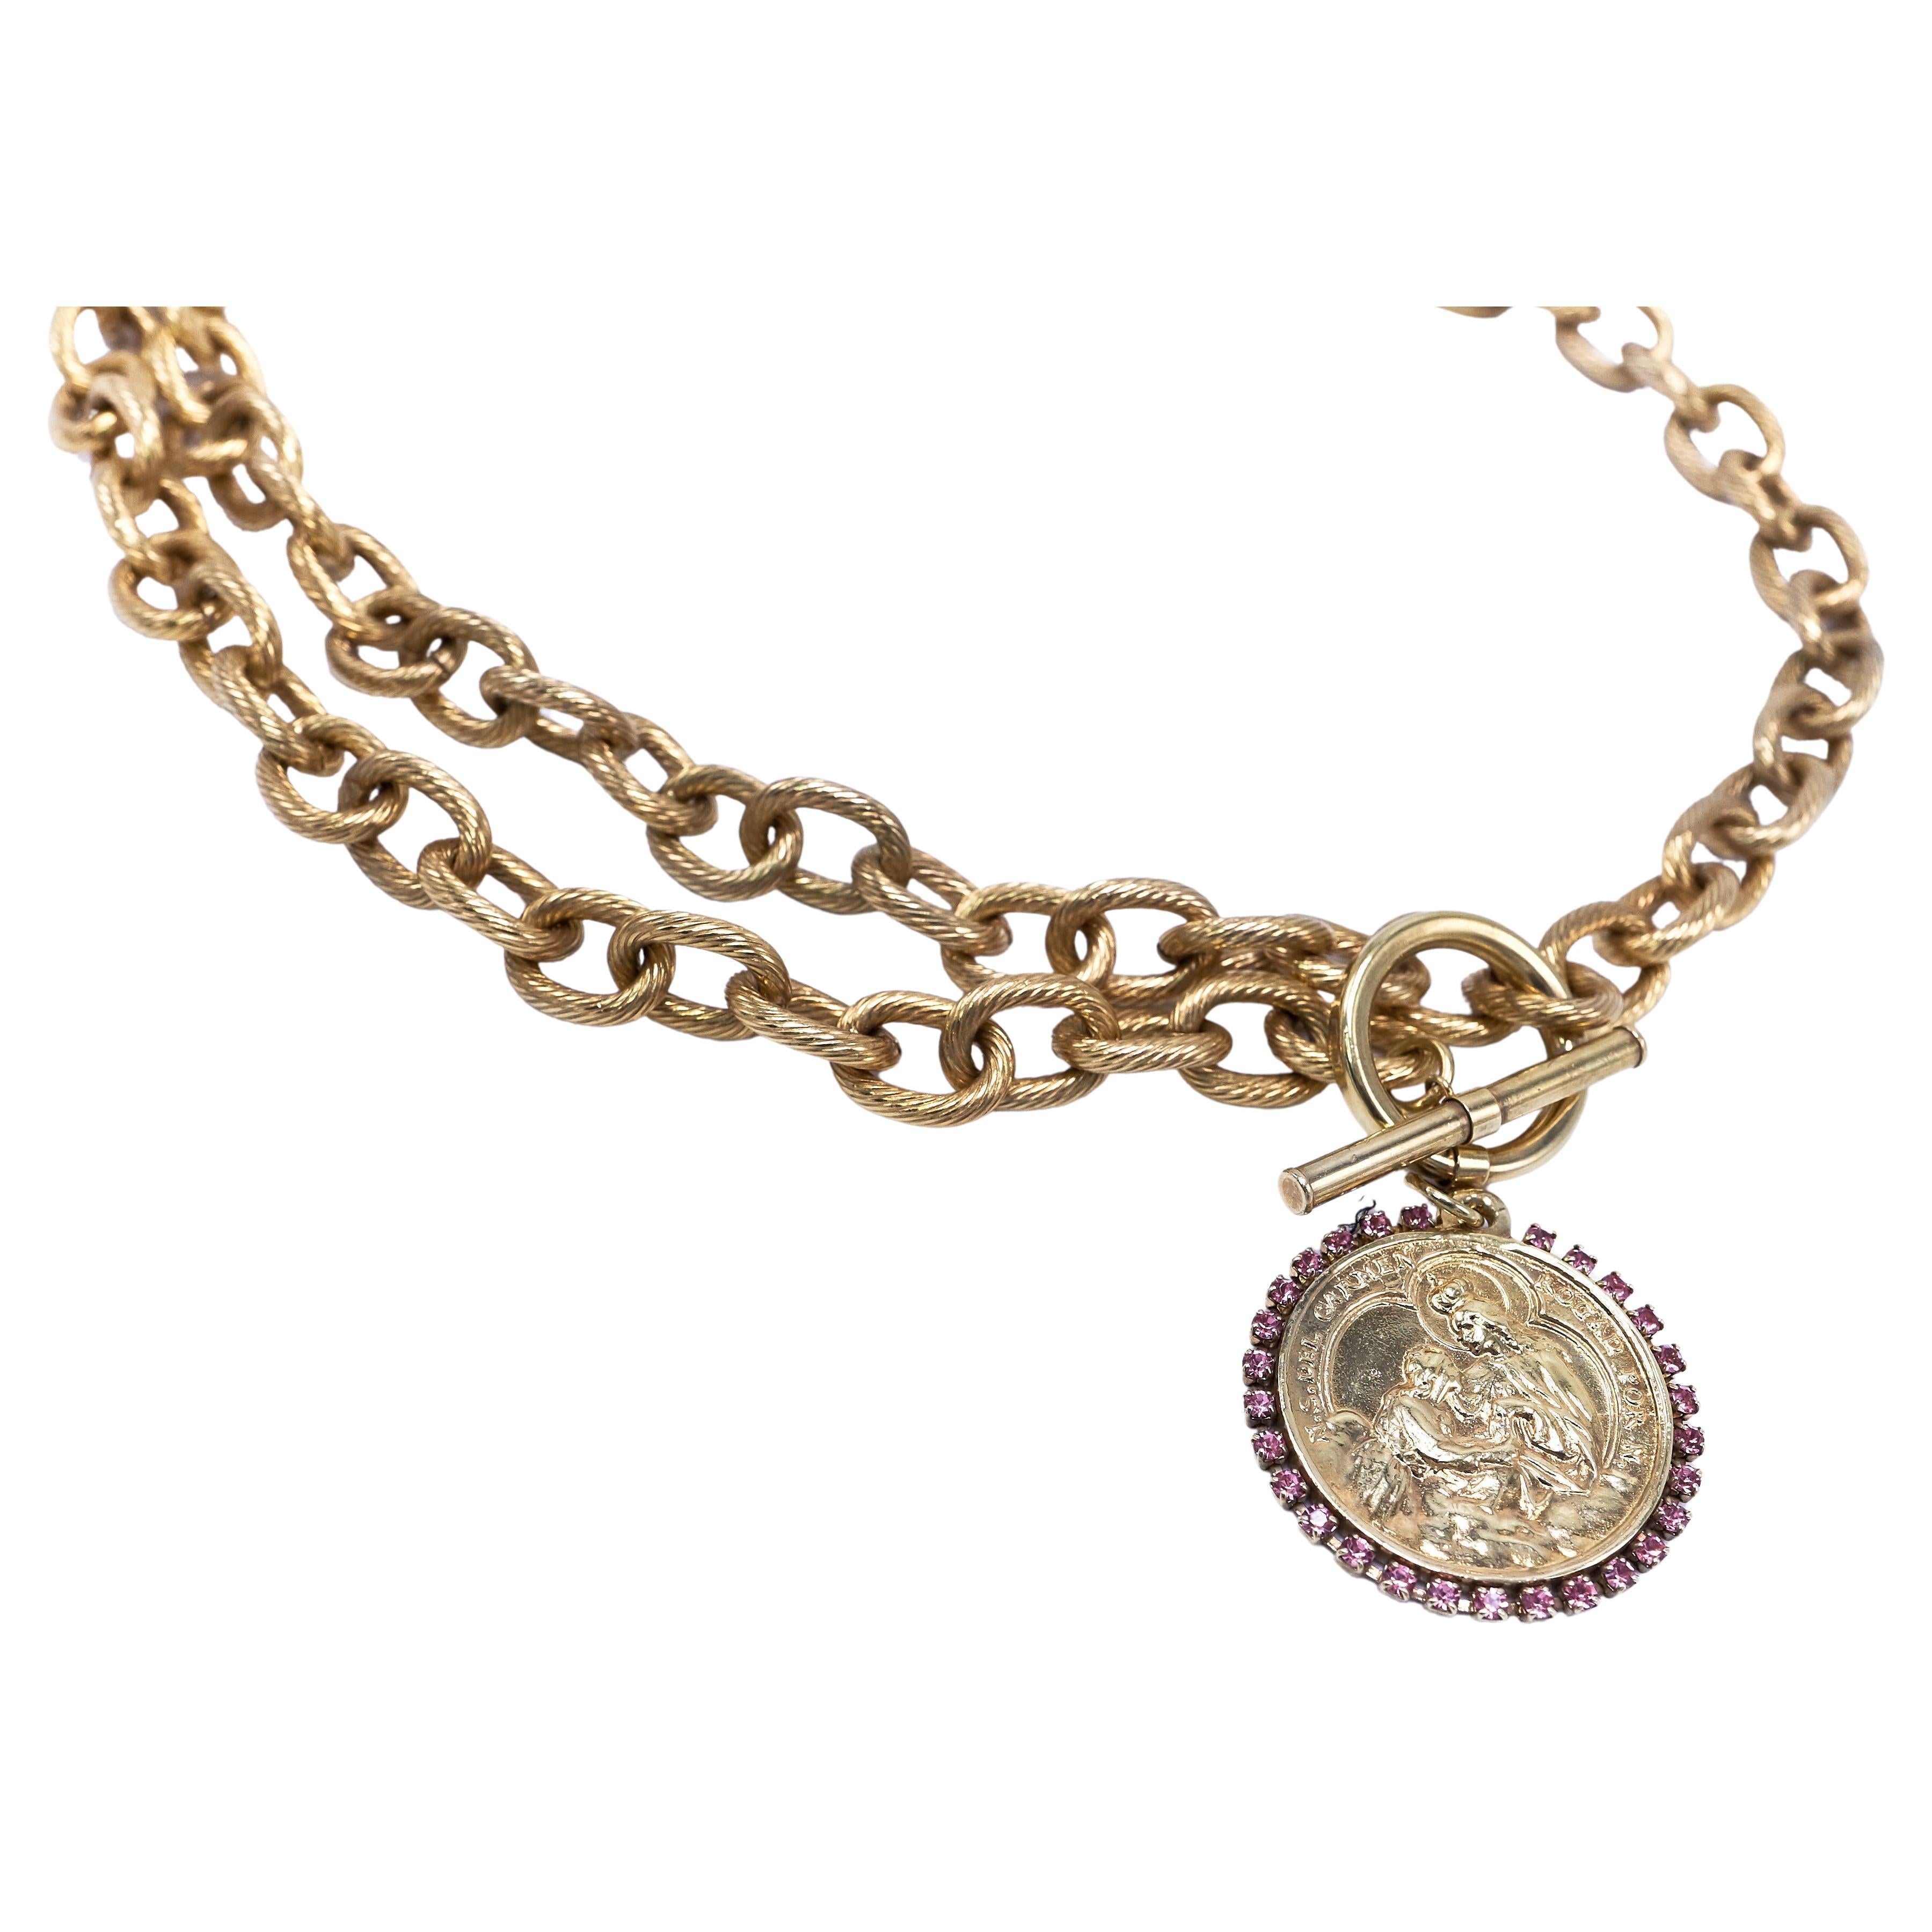 Medal Crystal Chain Necklace Choker J Dauphin

J DAUPHIN necklace 